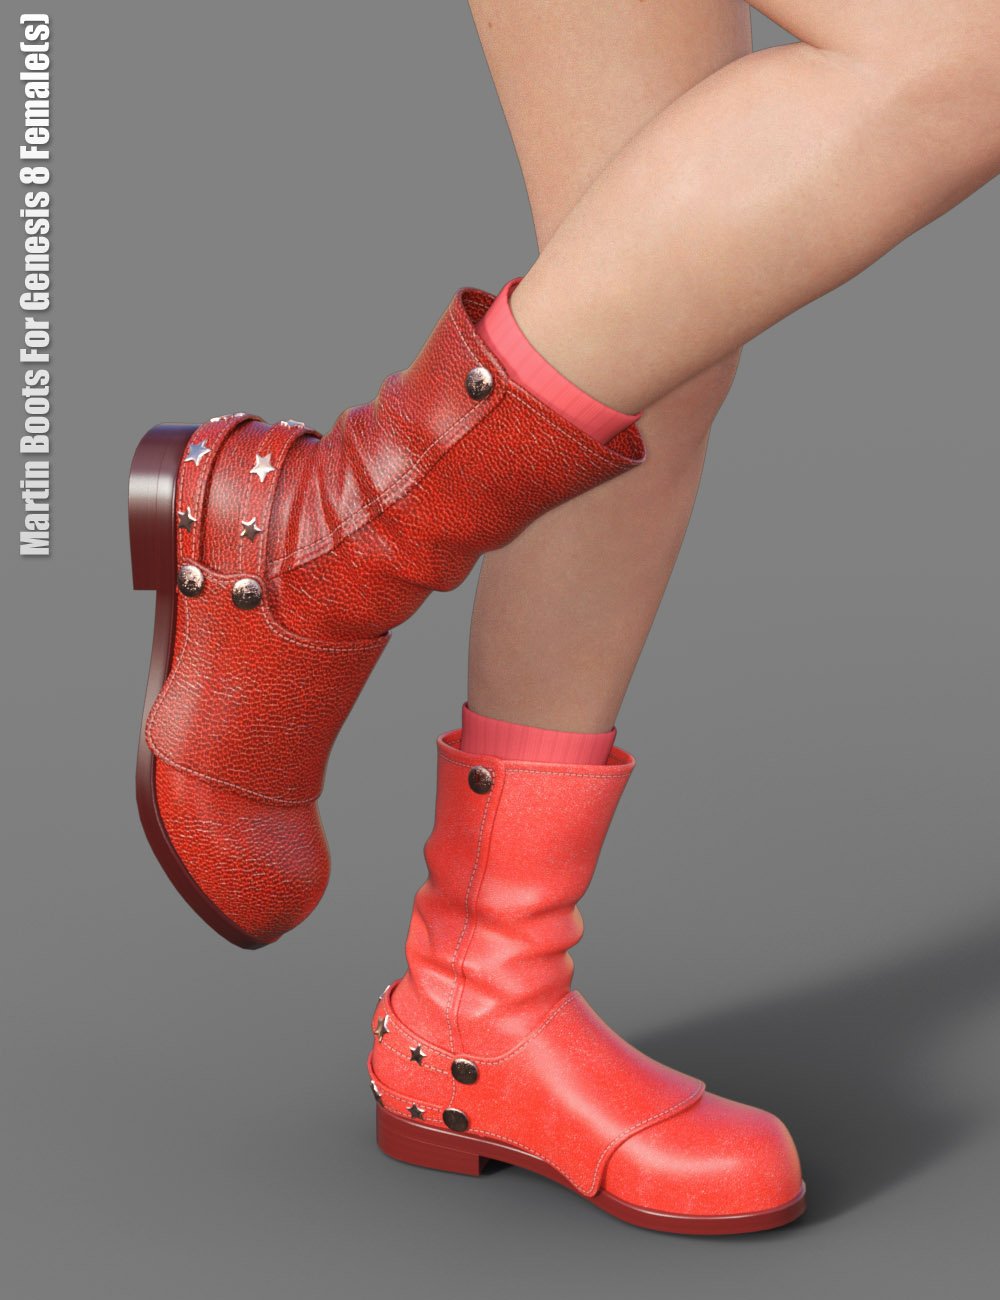 Martin Boots For Genesis 8 Female(s) by: dx30, 3D Models by Daz 3D